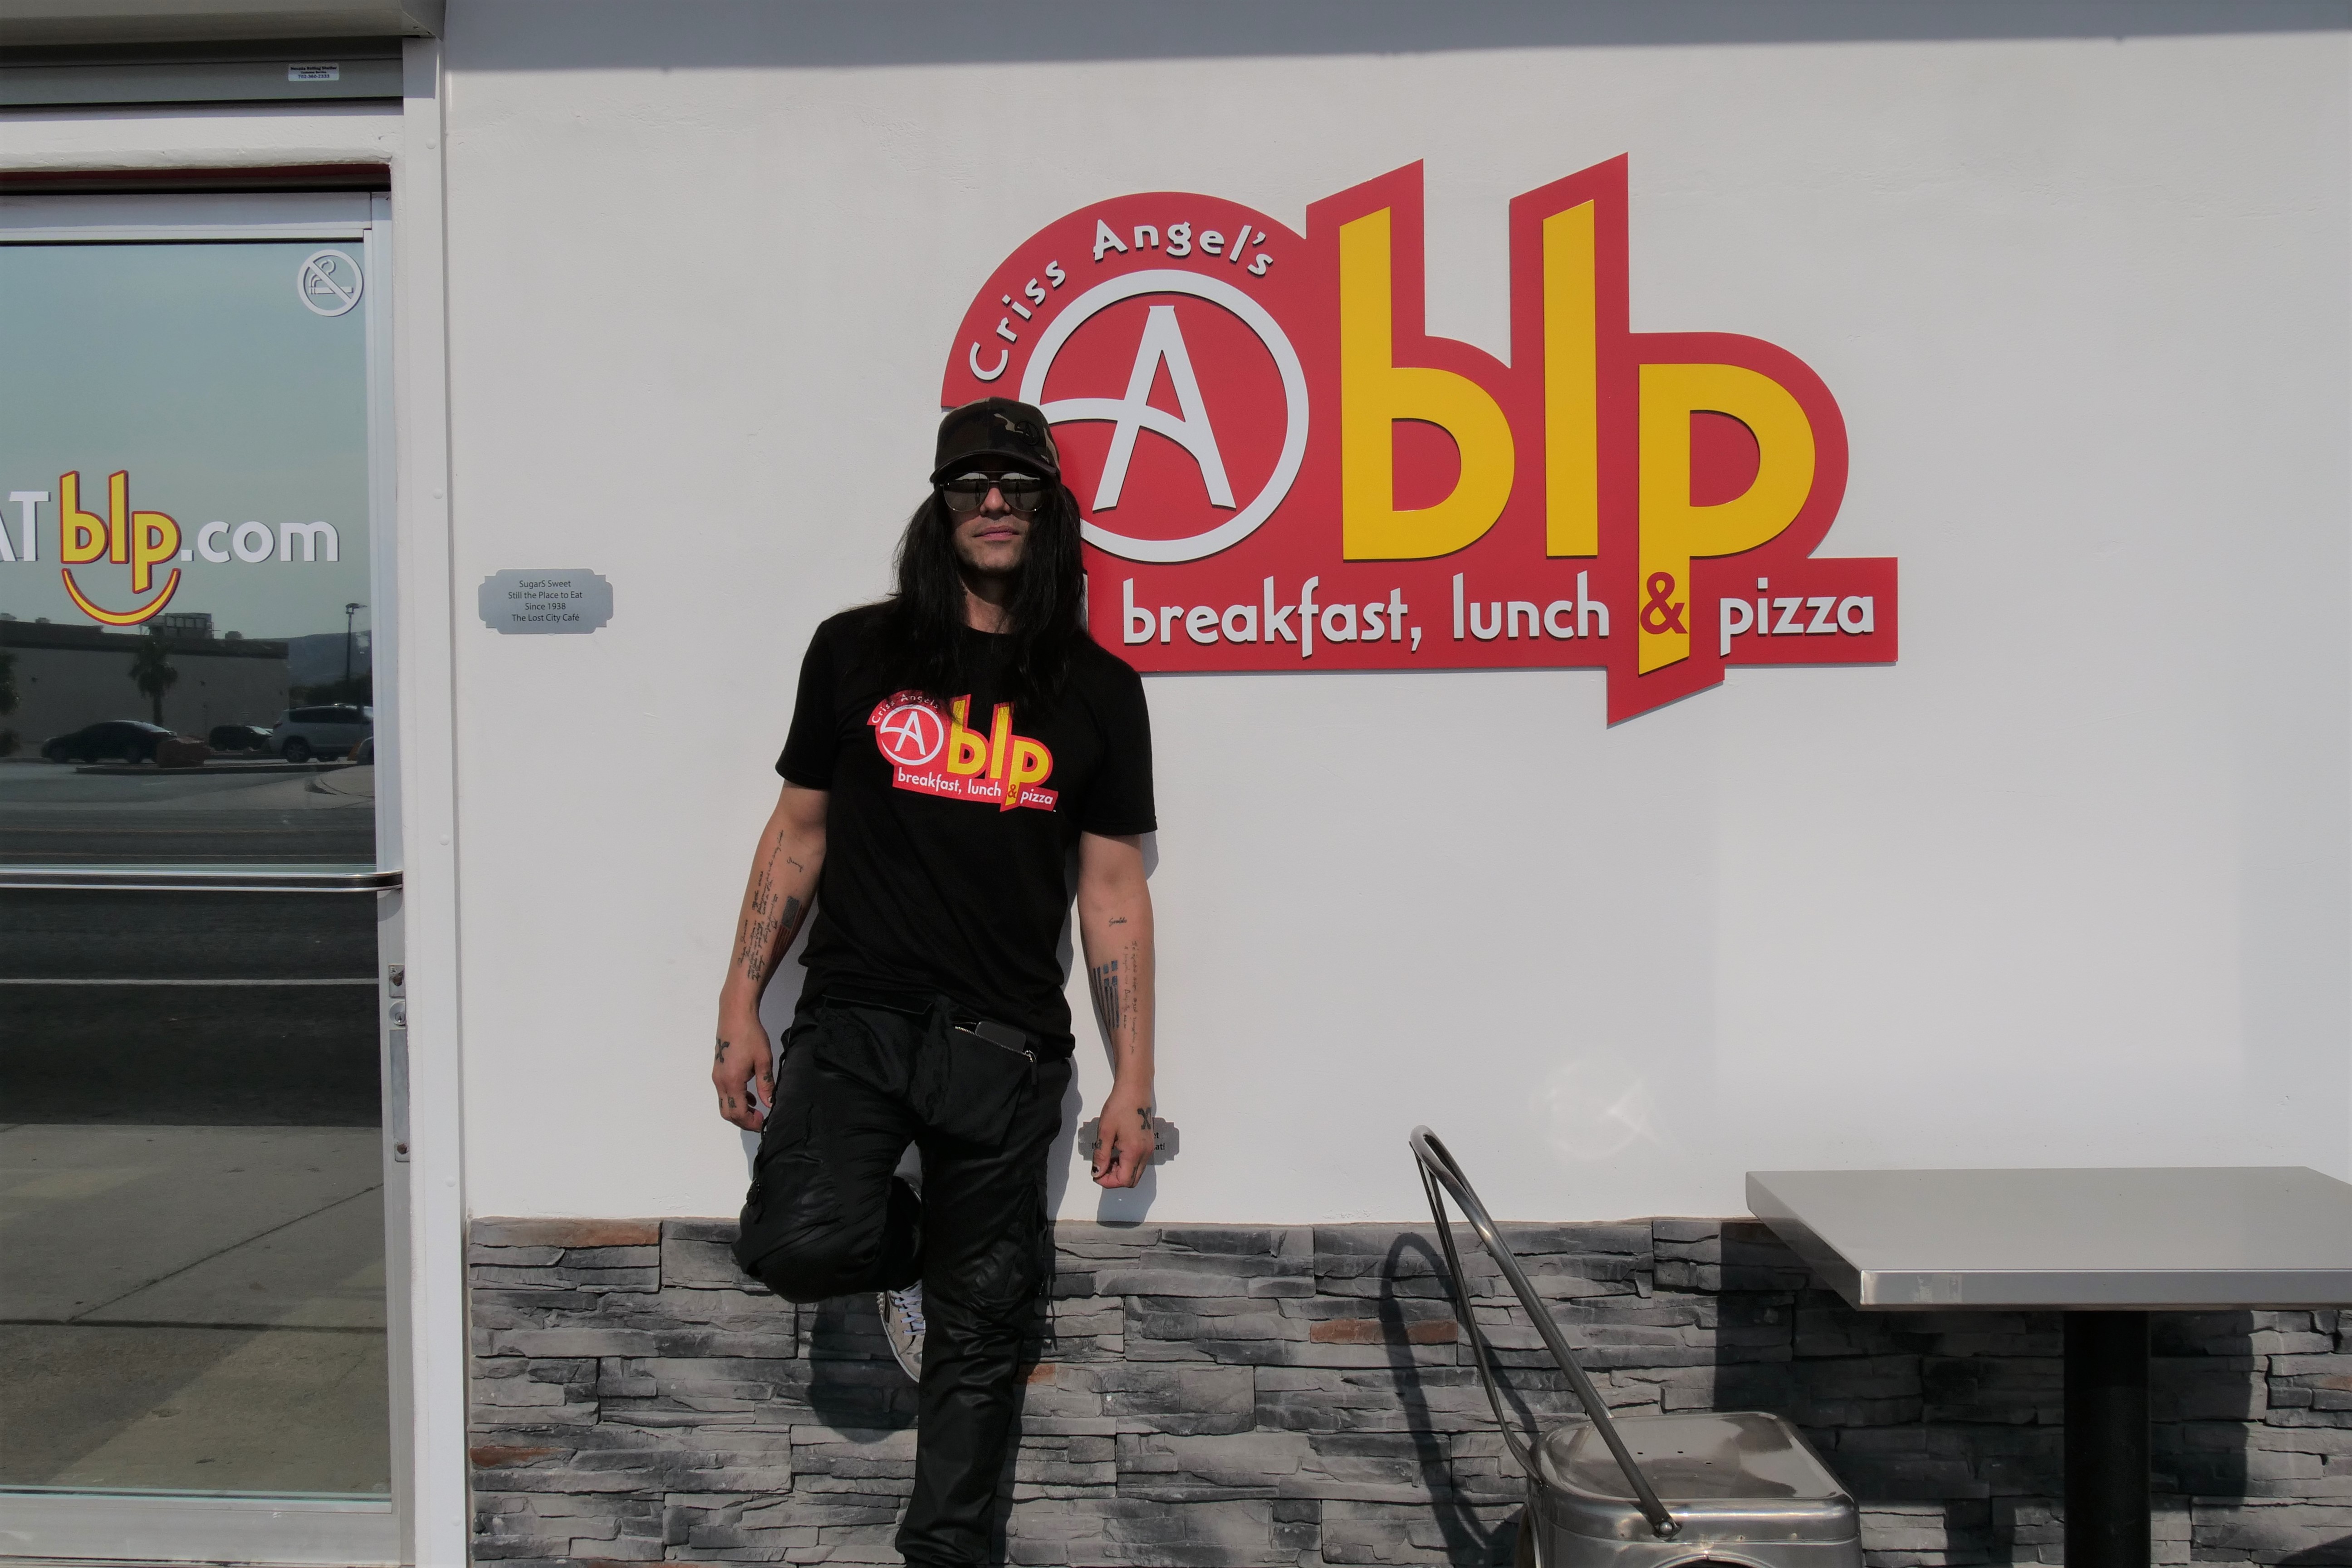  A man in a black hat, shirt, and pants with sunglasses on stands in front of a sign that says Cablp